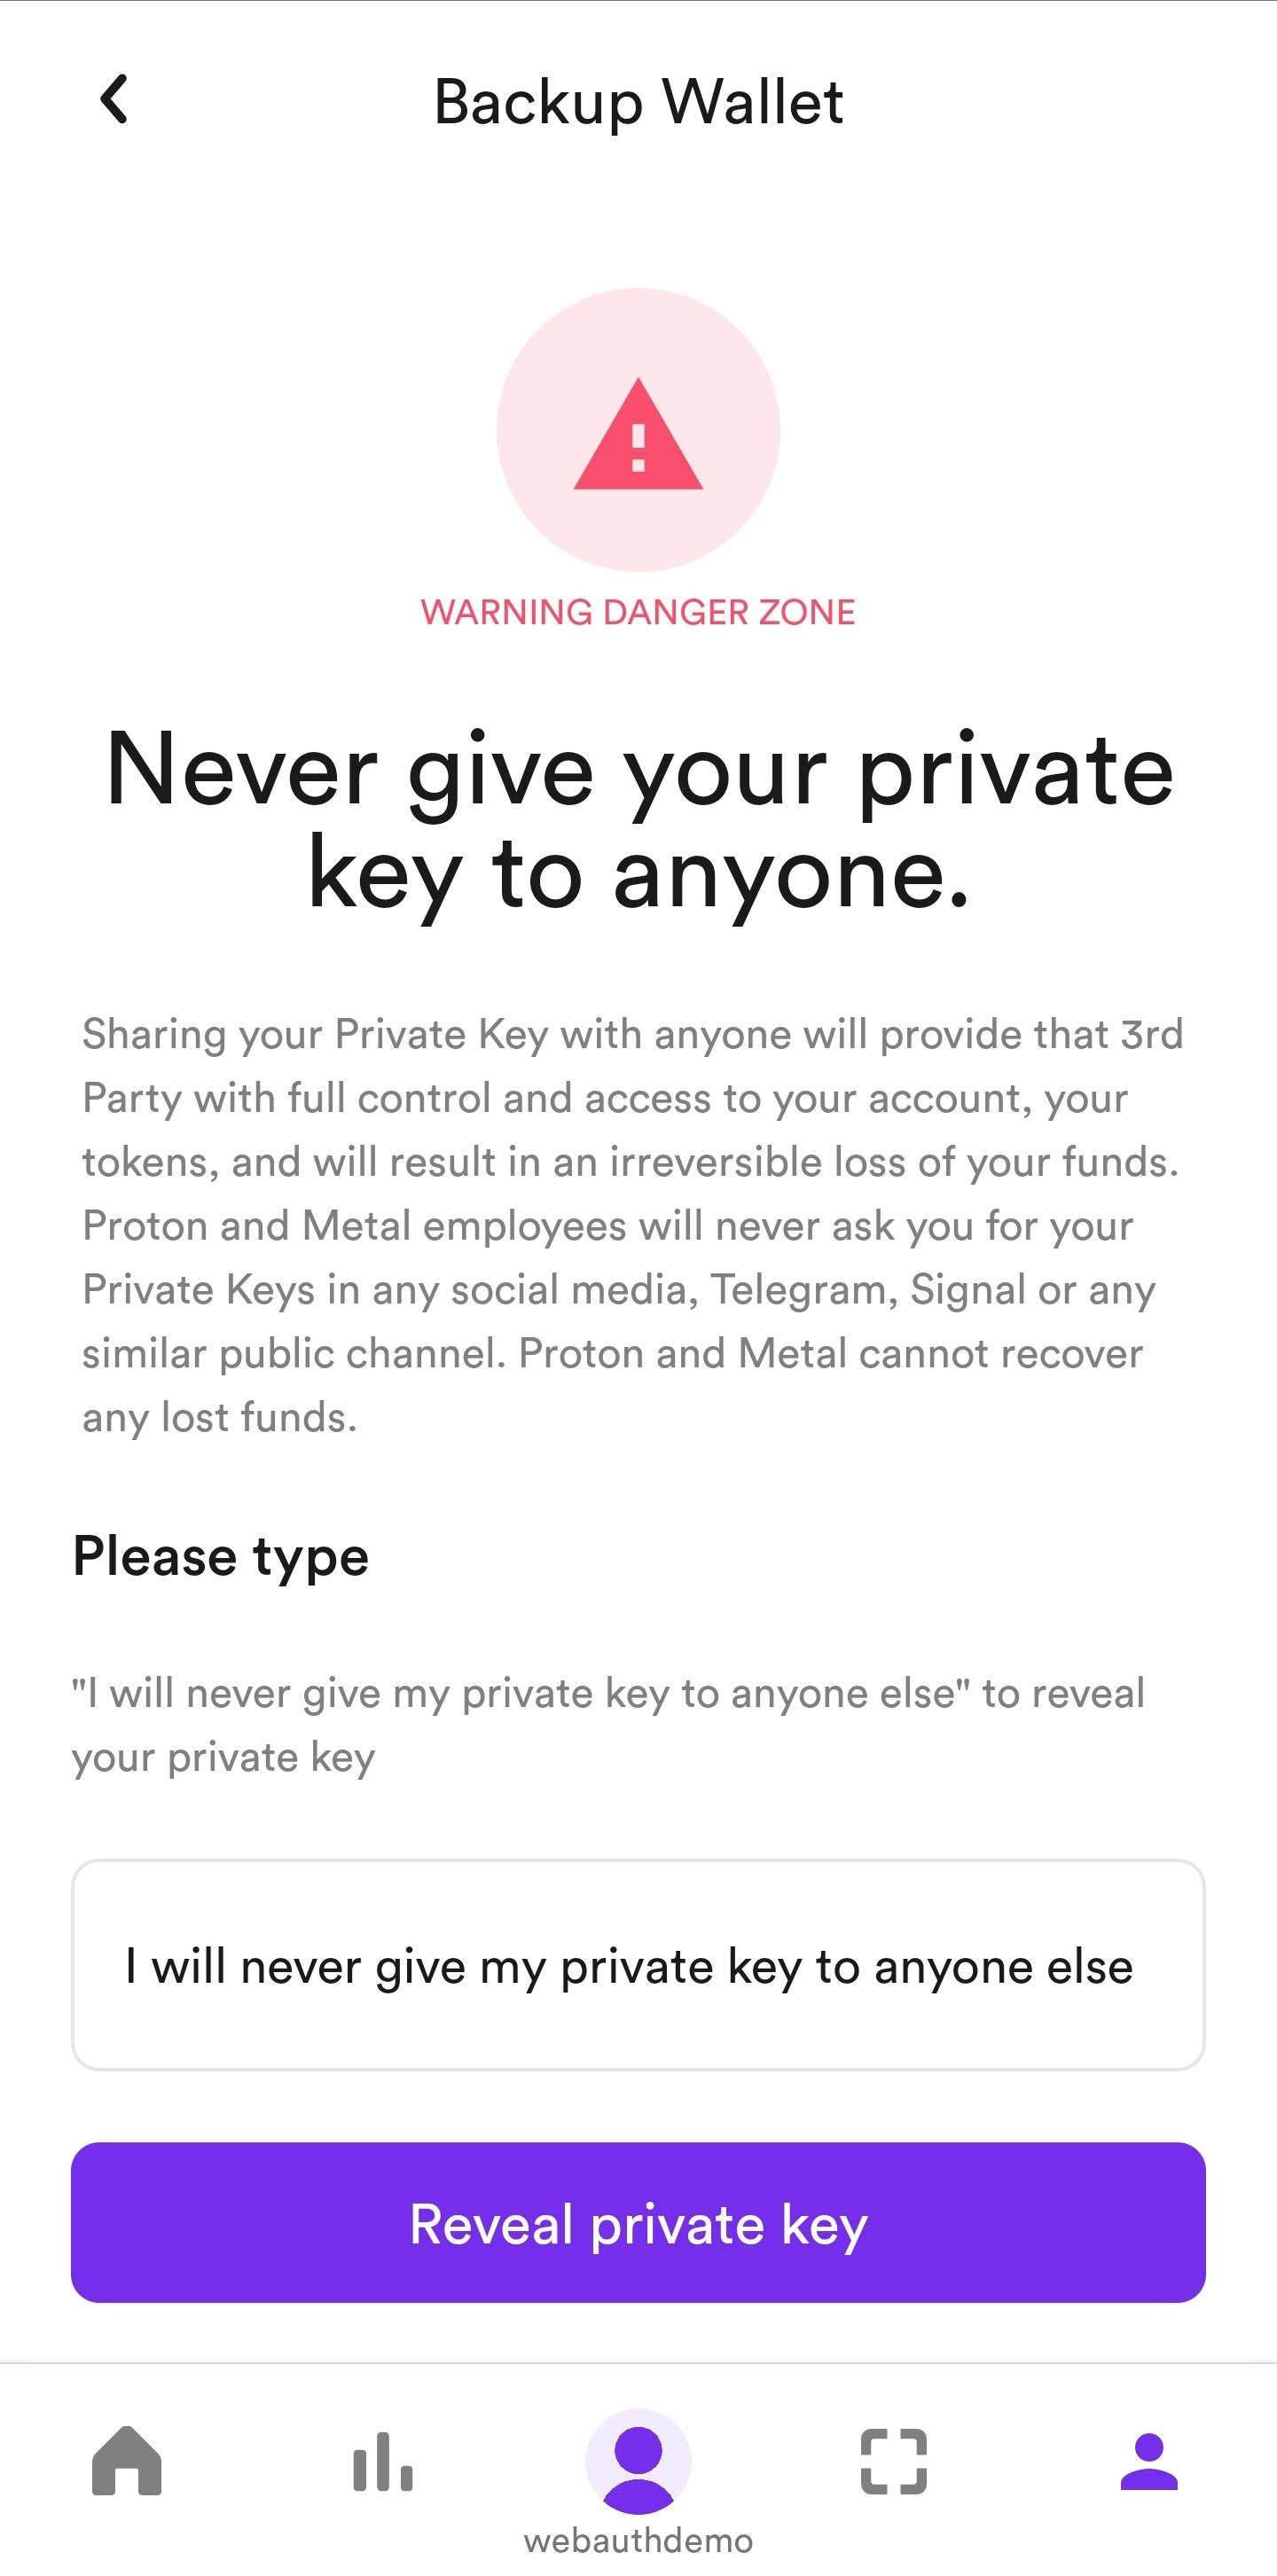 The importance of WebAuth.com Wallet private key